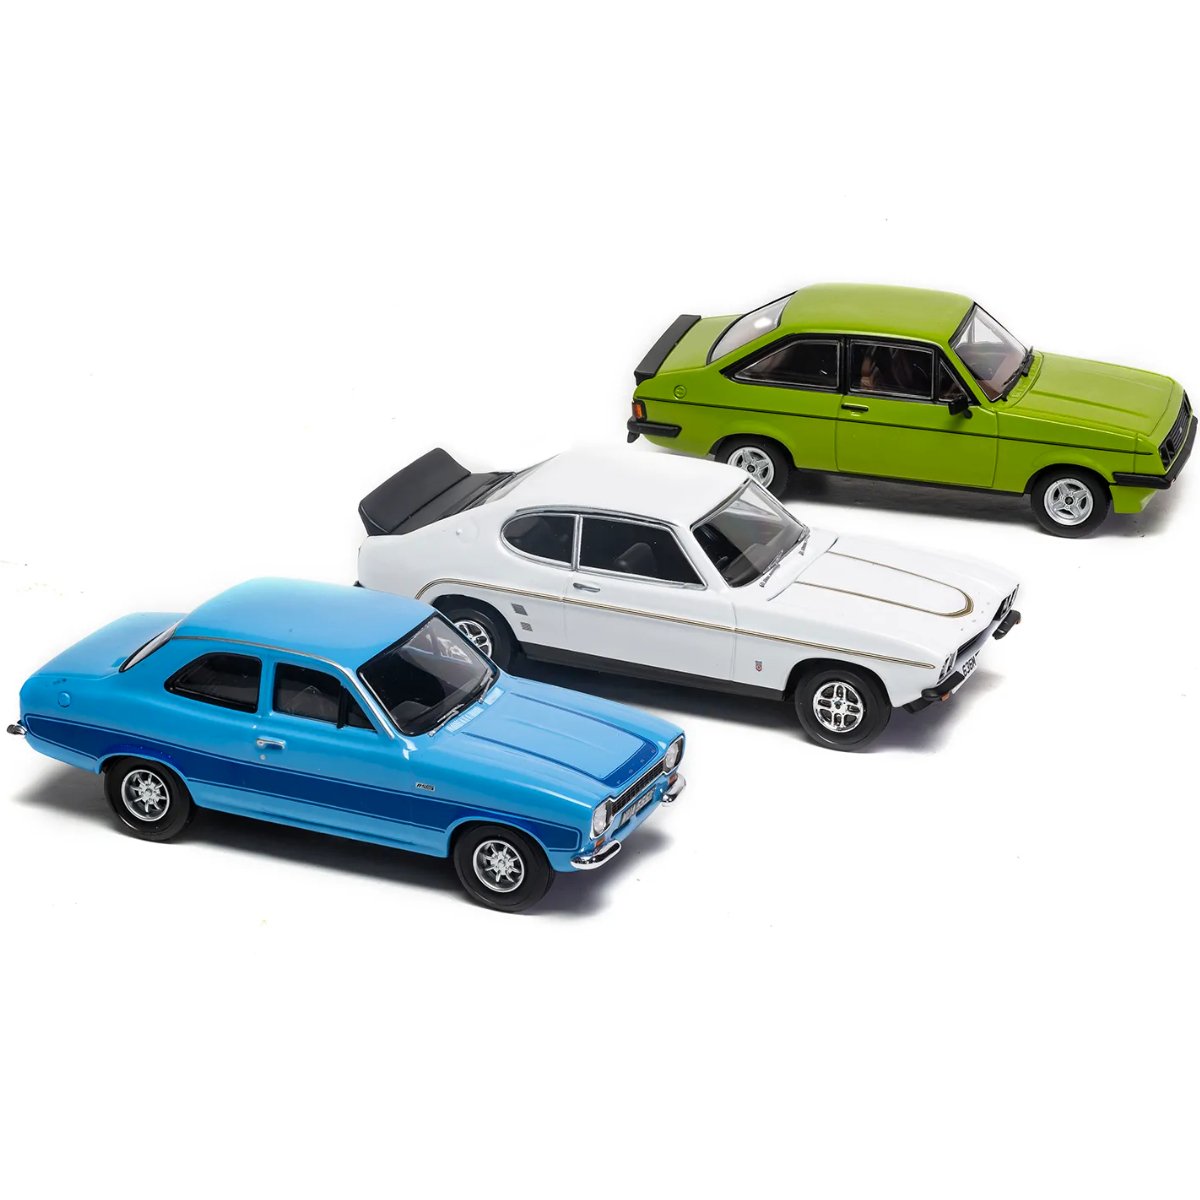 Corgi RS00002 1970s Ford RS Collection - Phillips Hobbies